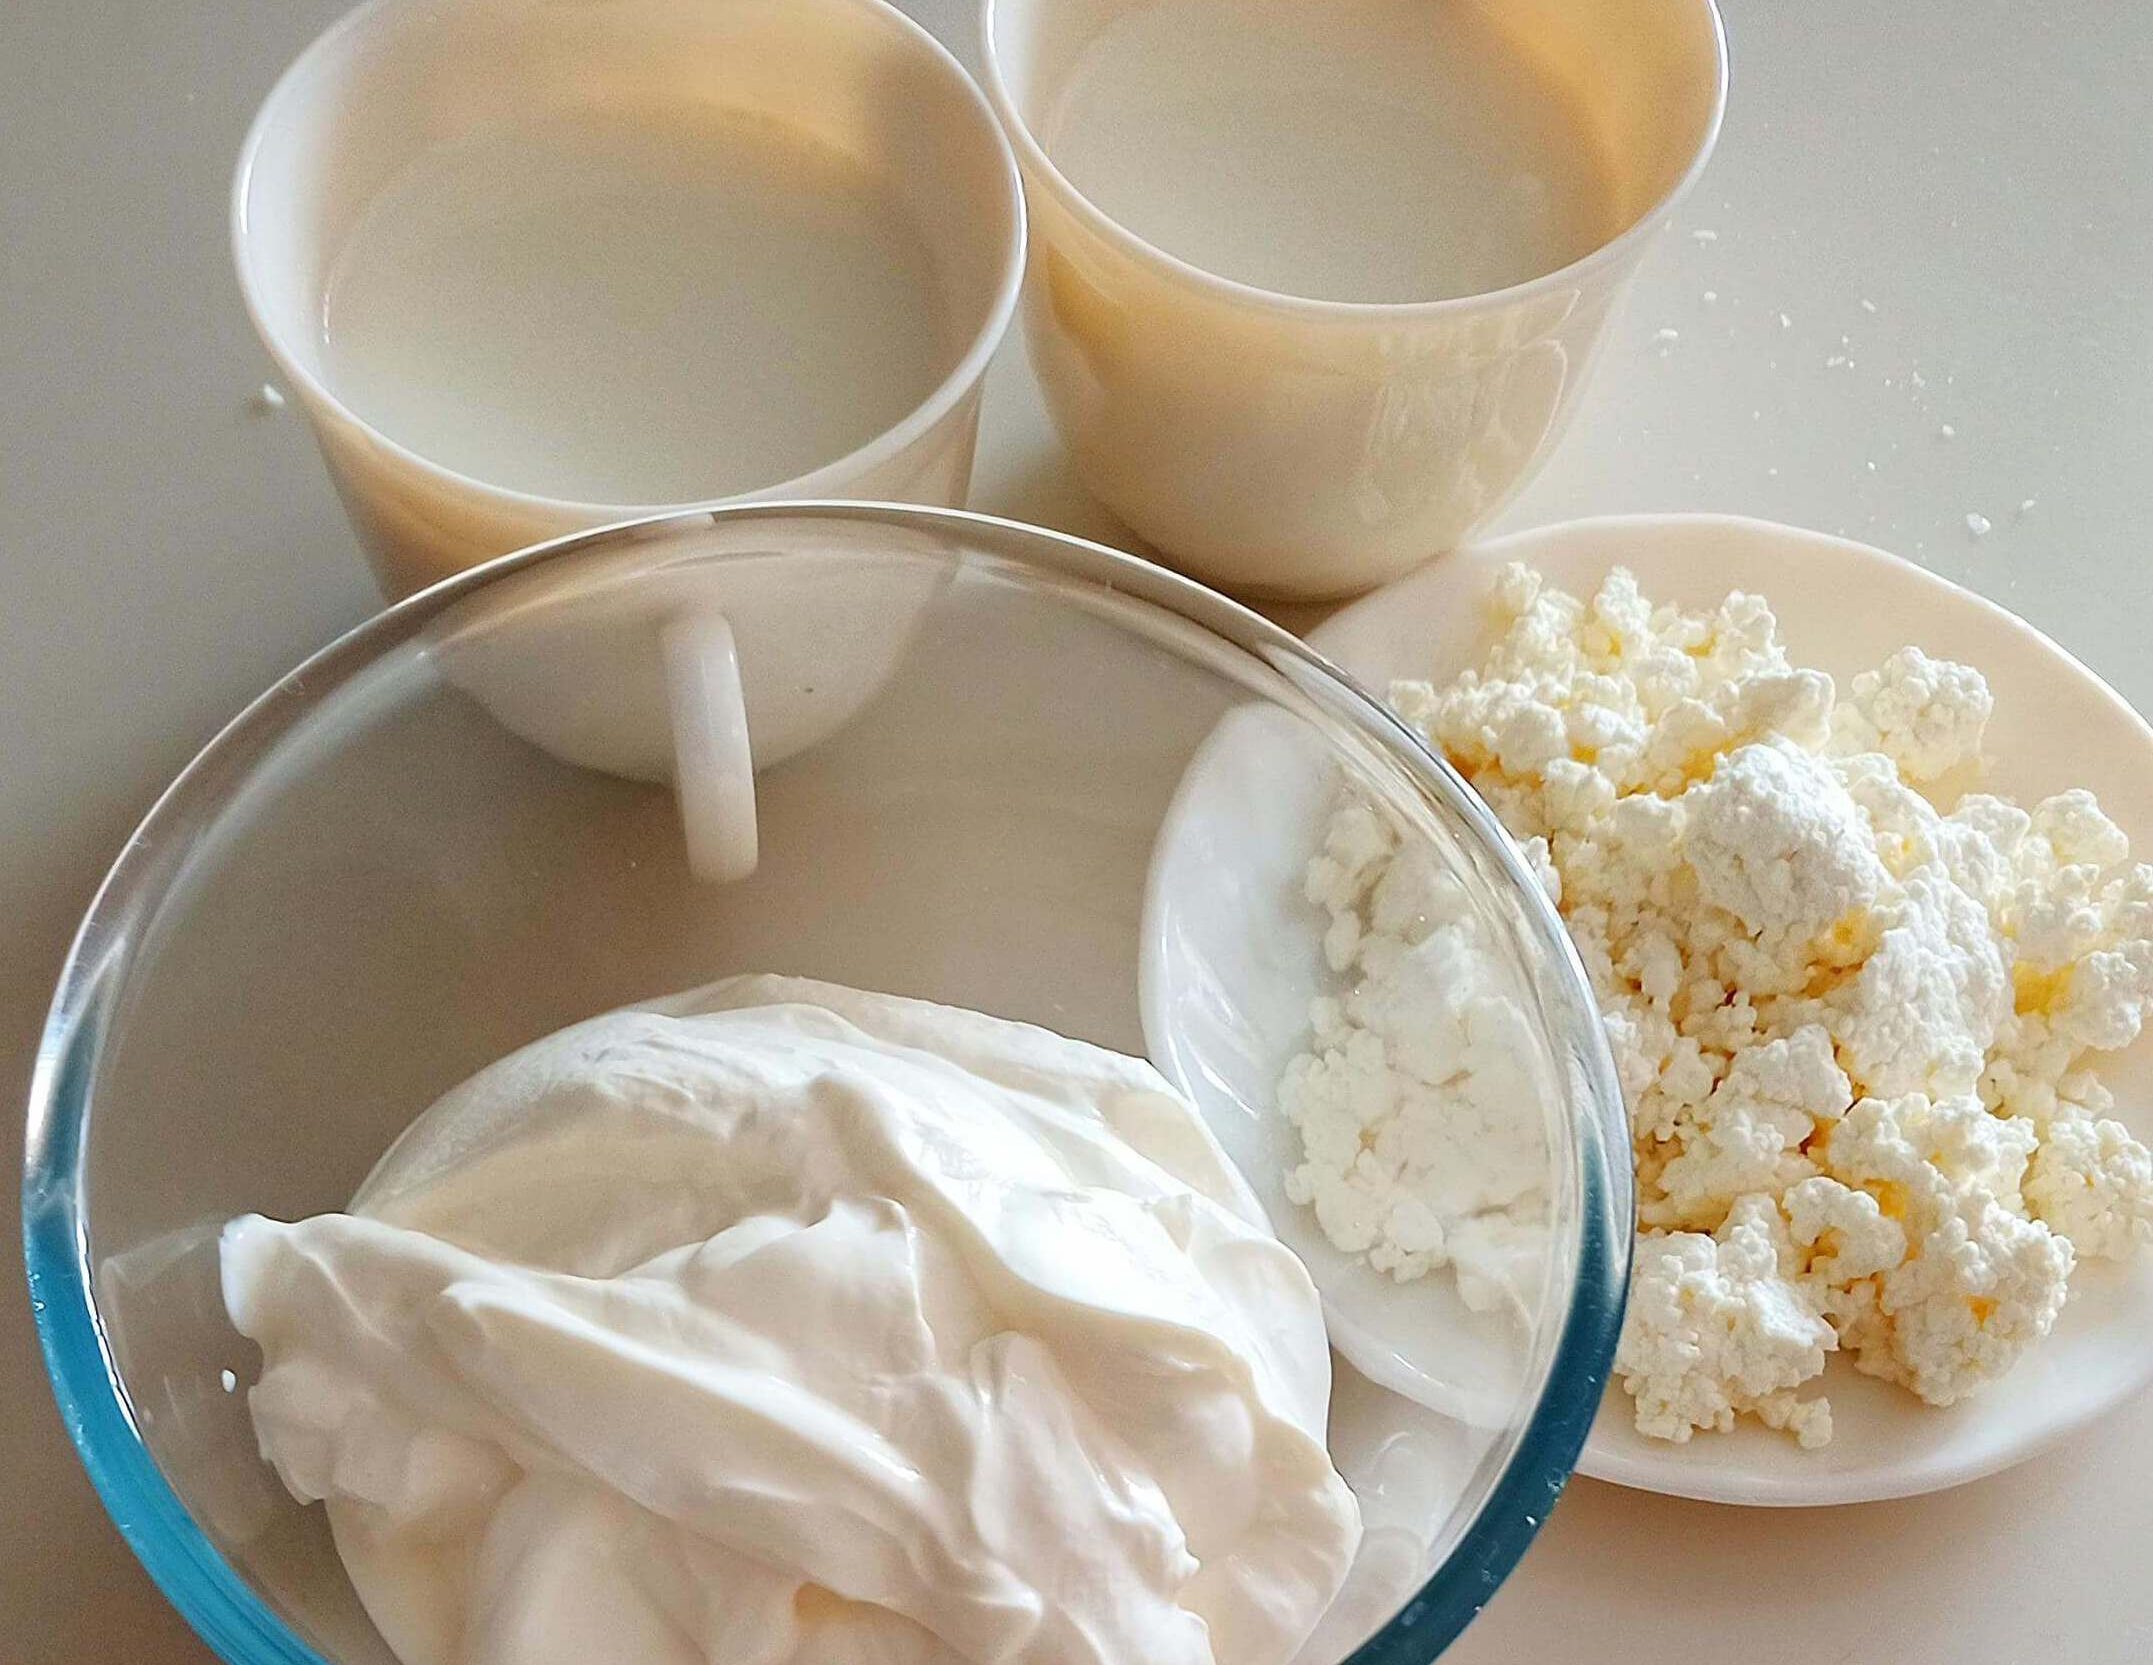 Cups of milk, a clear bowl of yogurt, and a plate of soft cheese